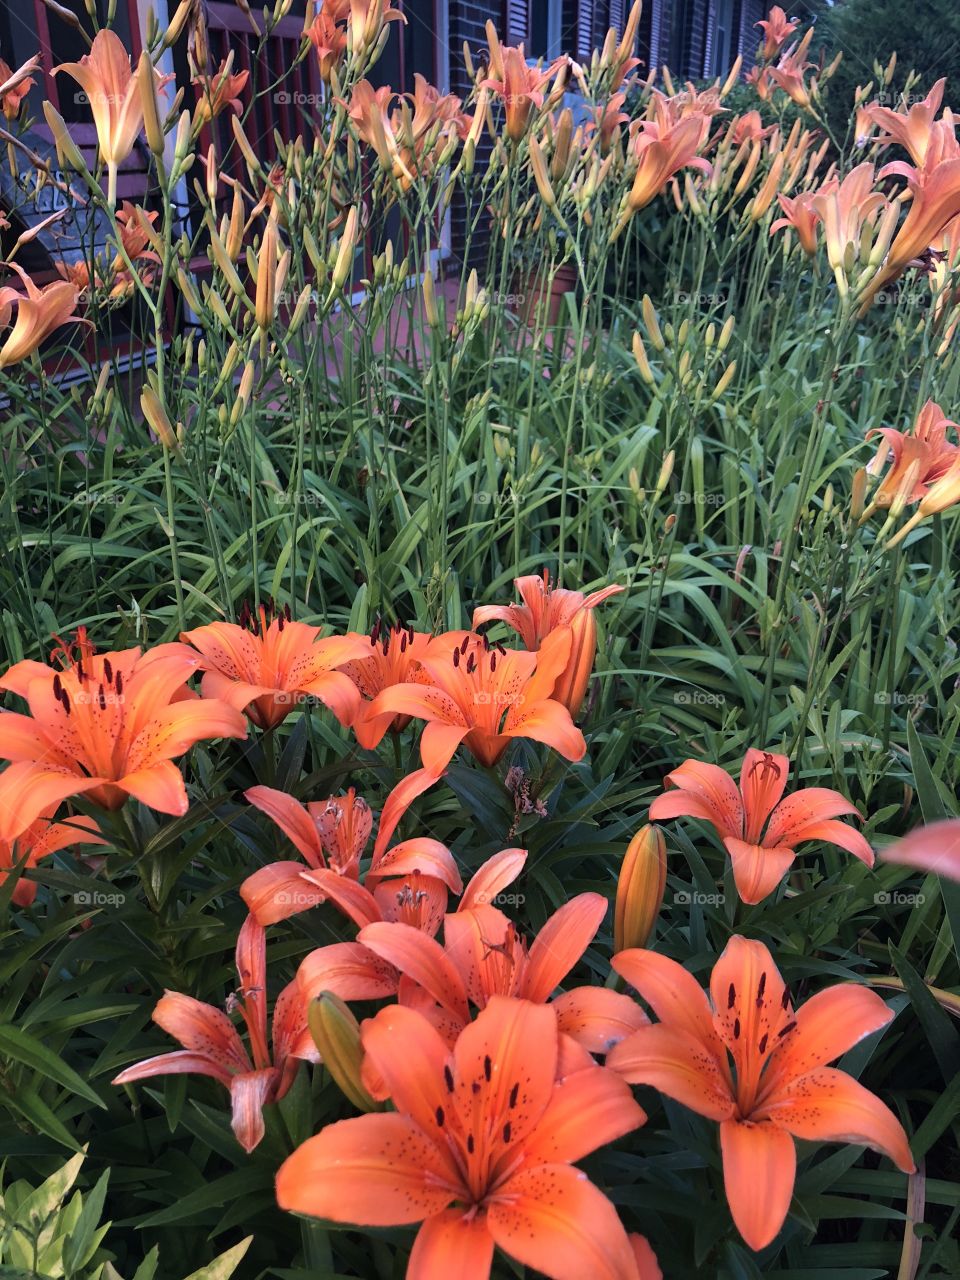 Gorgeous orange tiger lilies and daylilies with their smiling faces in the garden. 